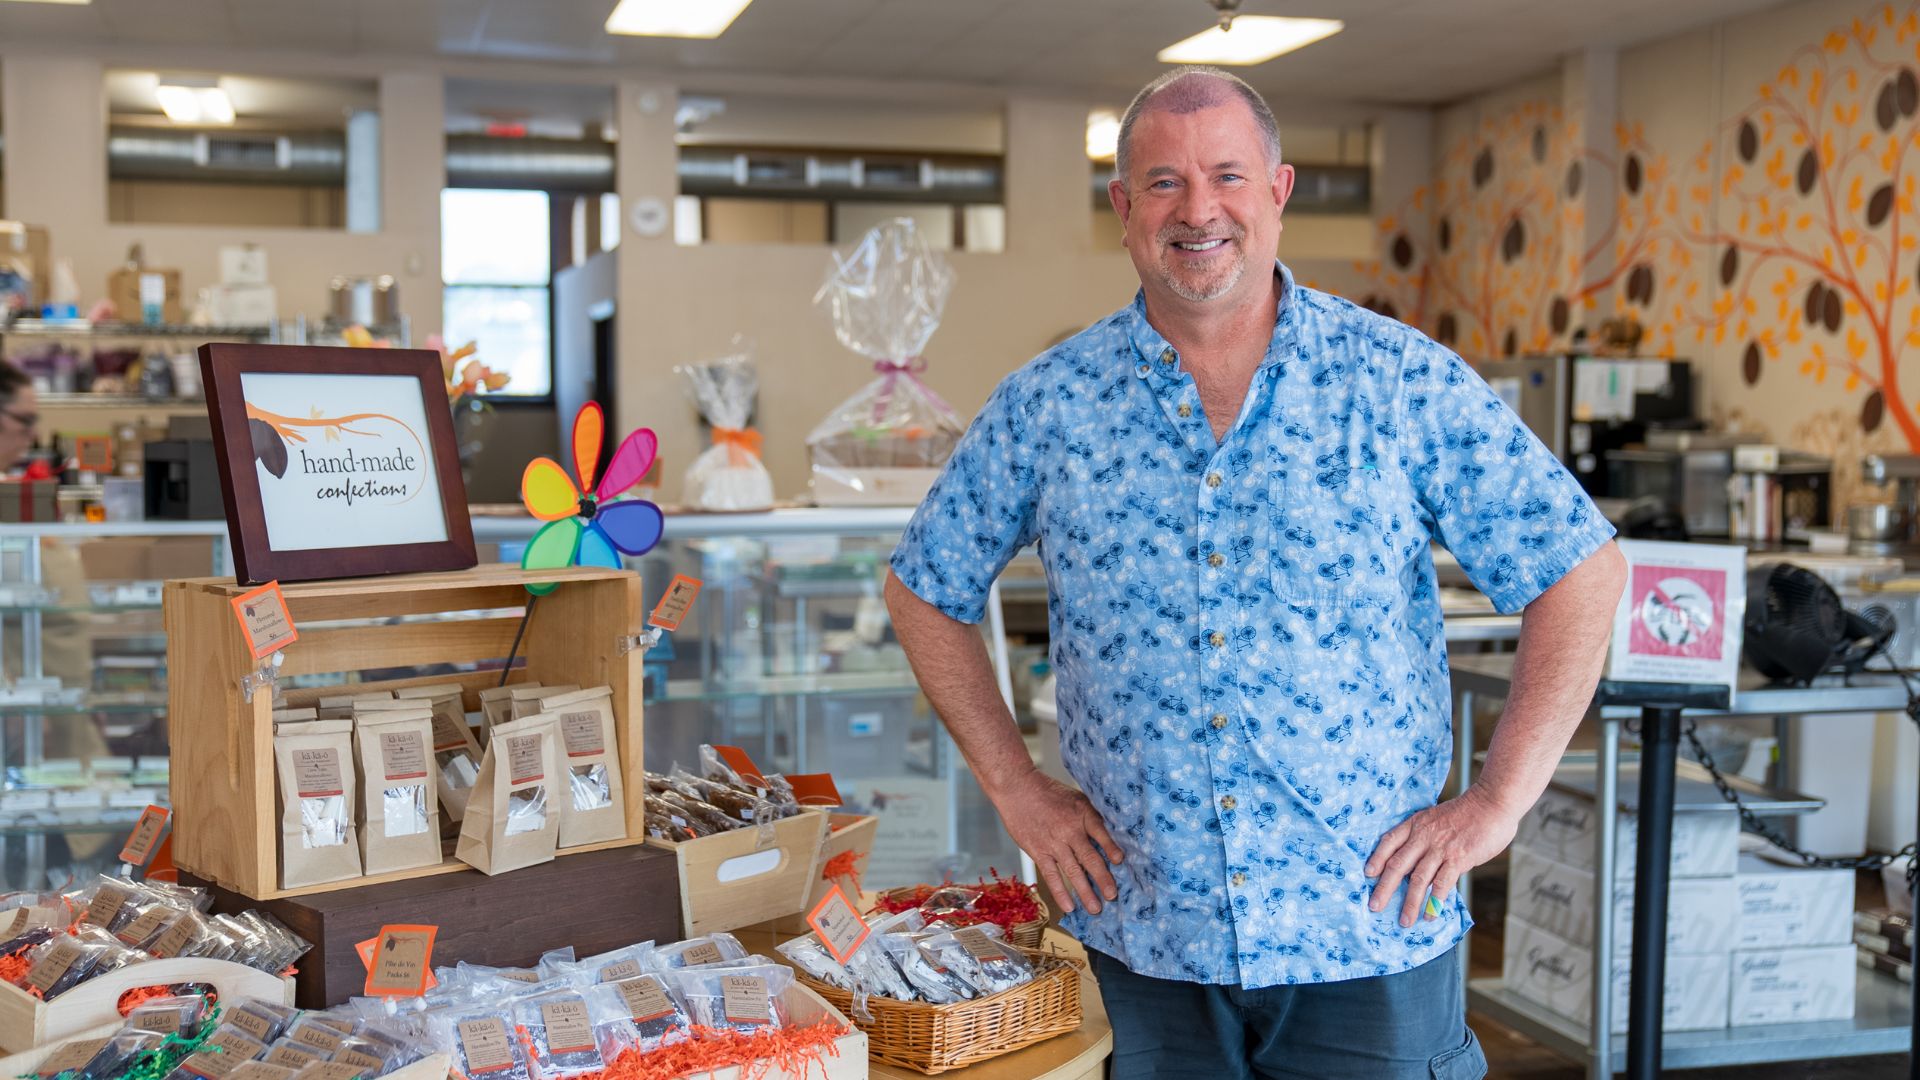 Brian Pelletier, owner of Kakao Chocolate, poses in the St. Louis shop.